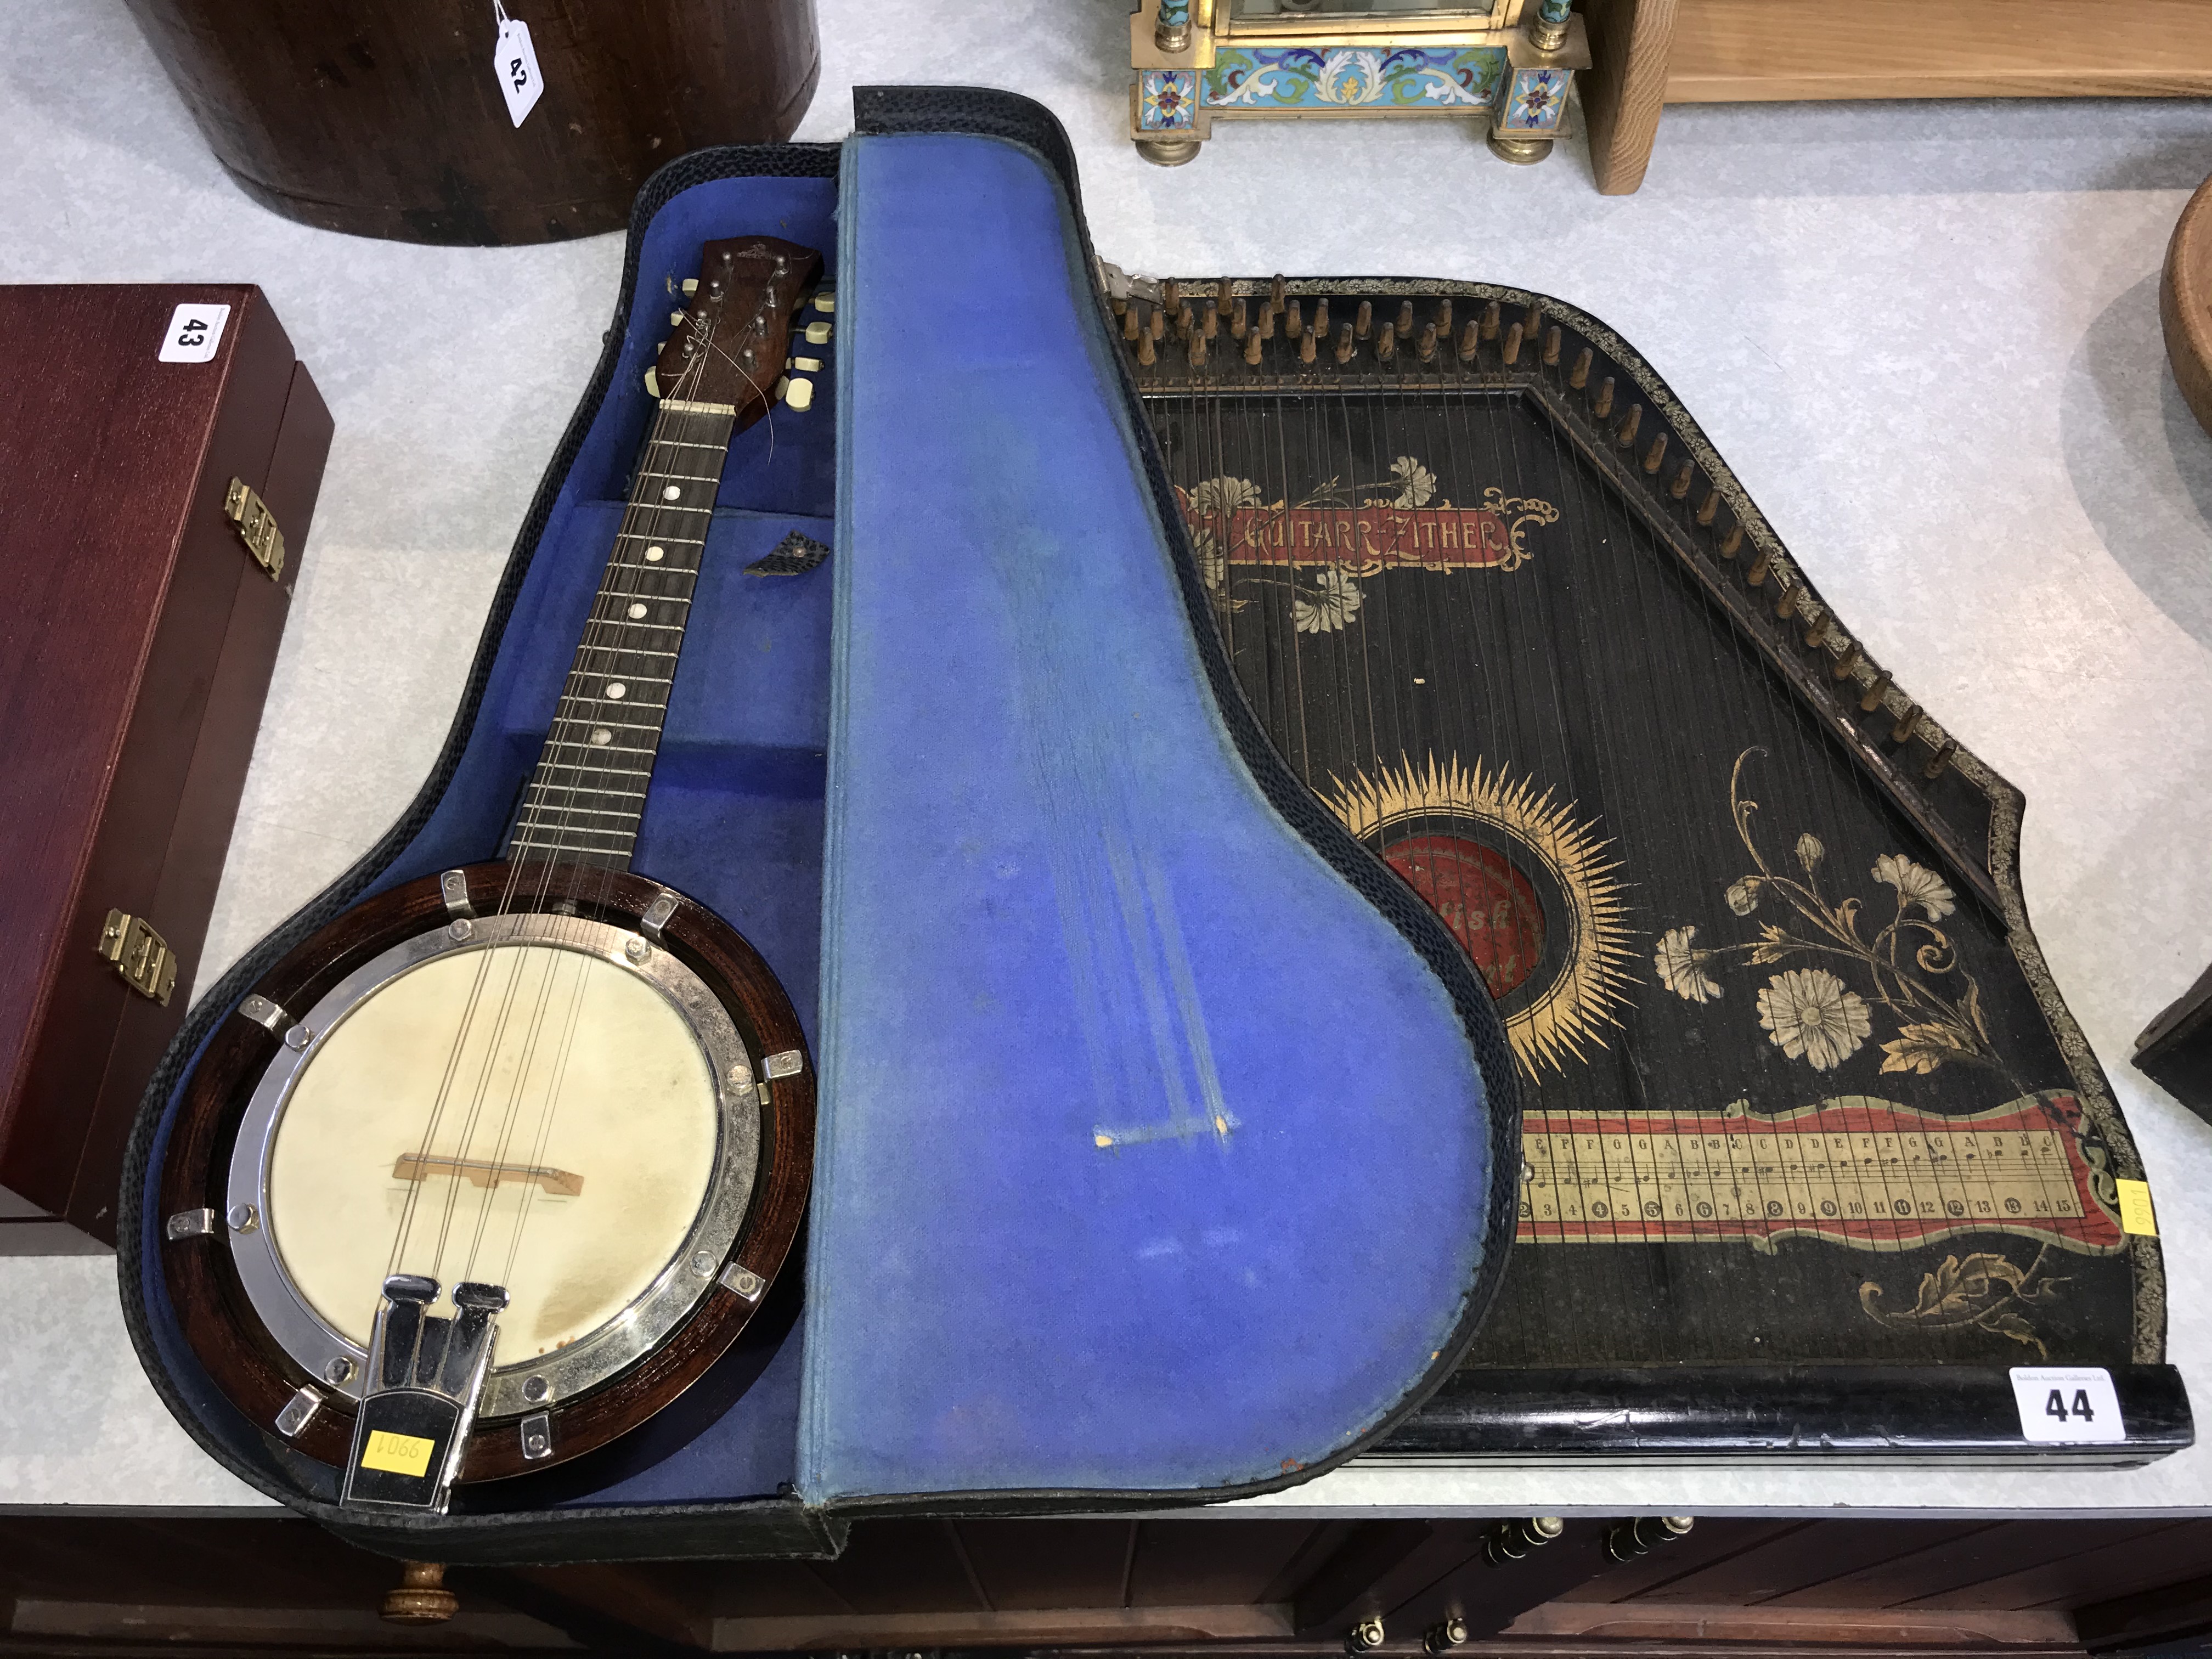 A Zither and a banjo